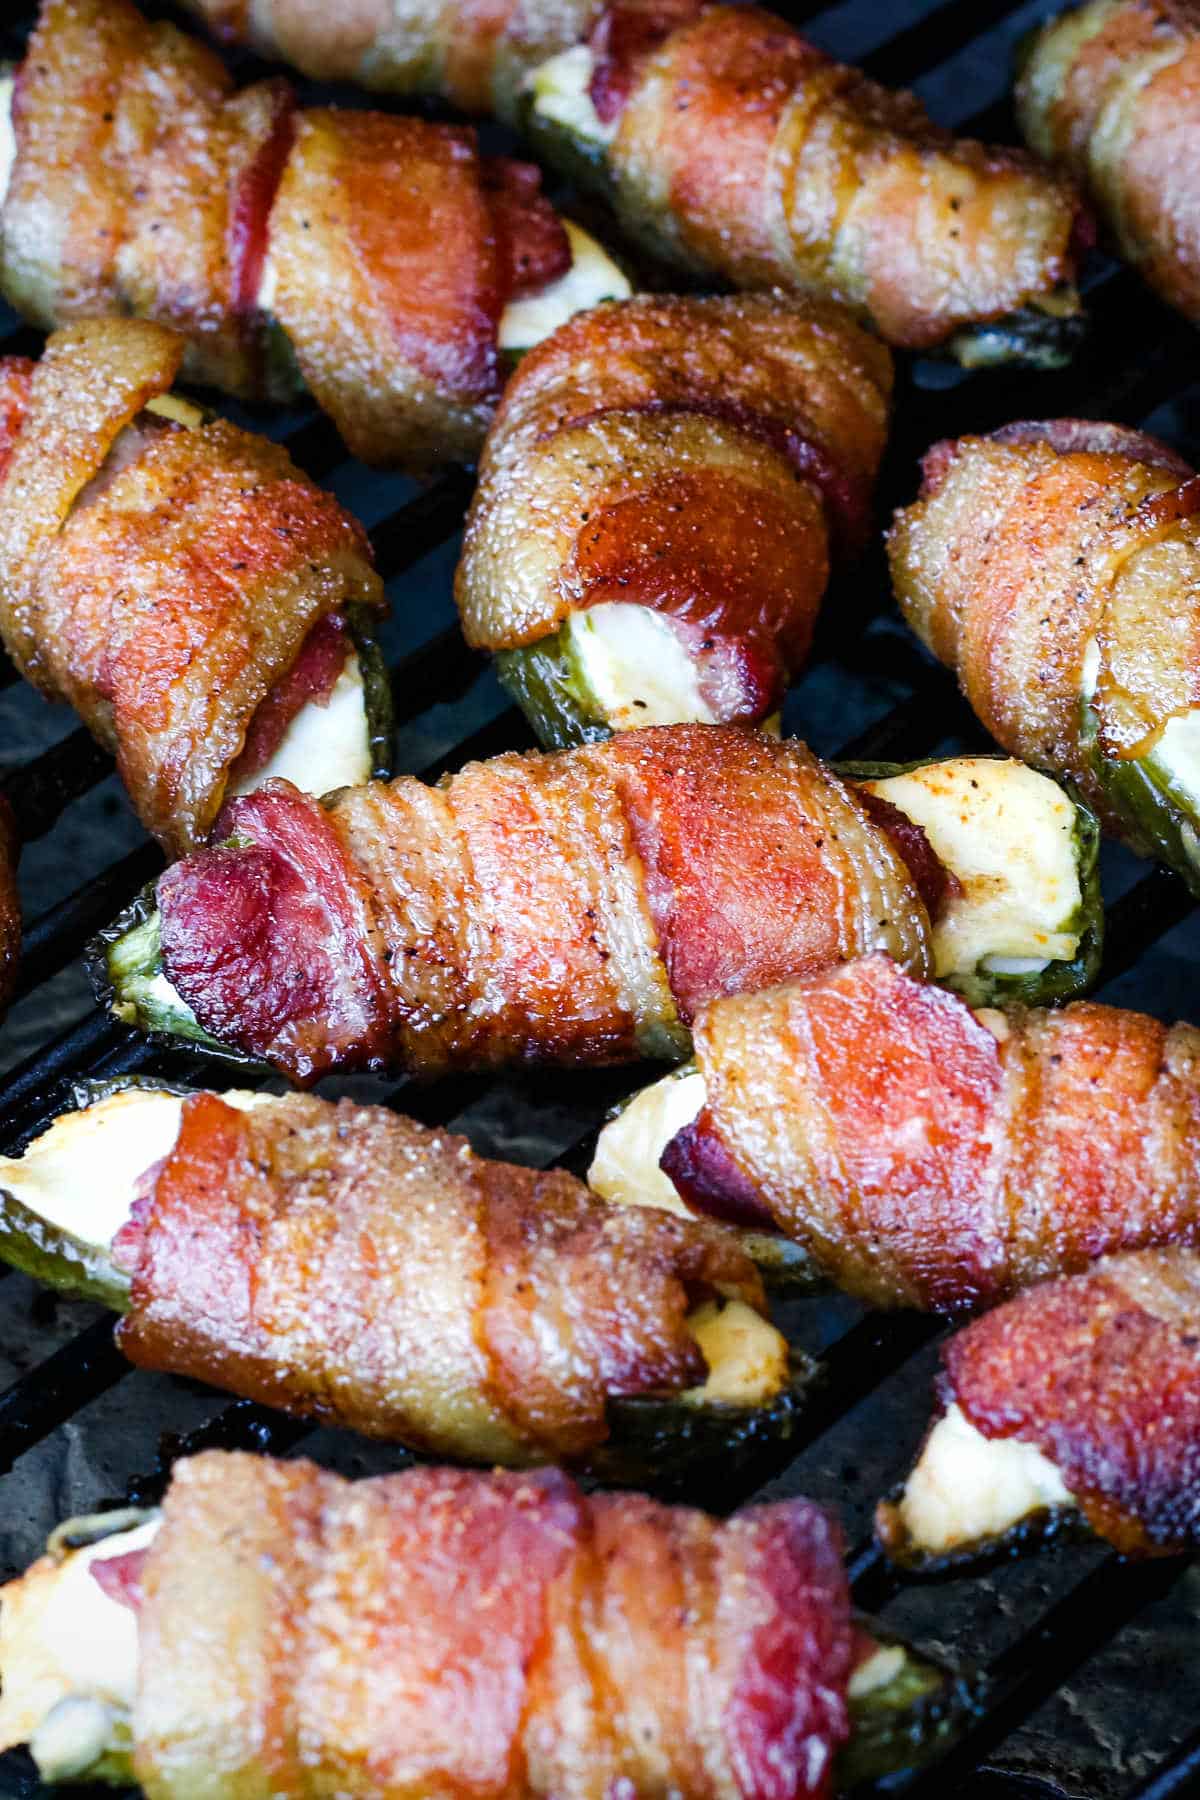 Smoked venison jalapeno poppers in a pellet grill.